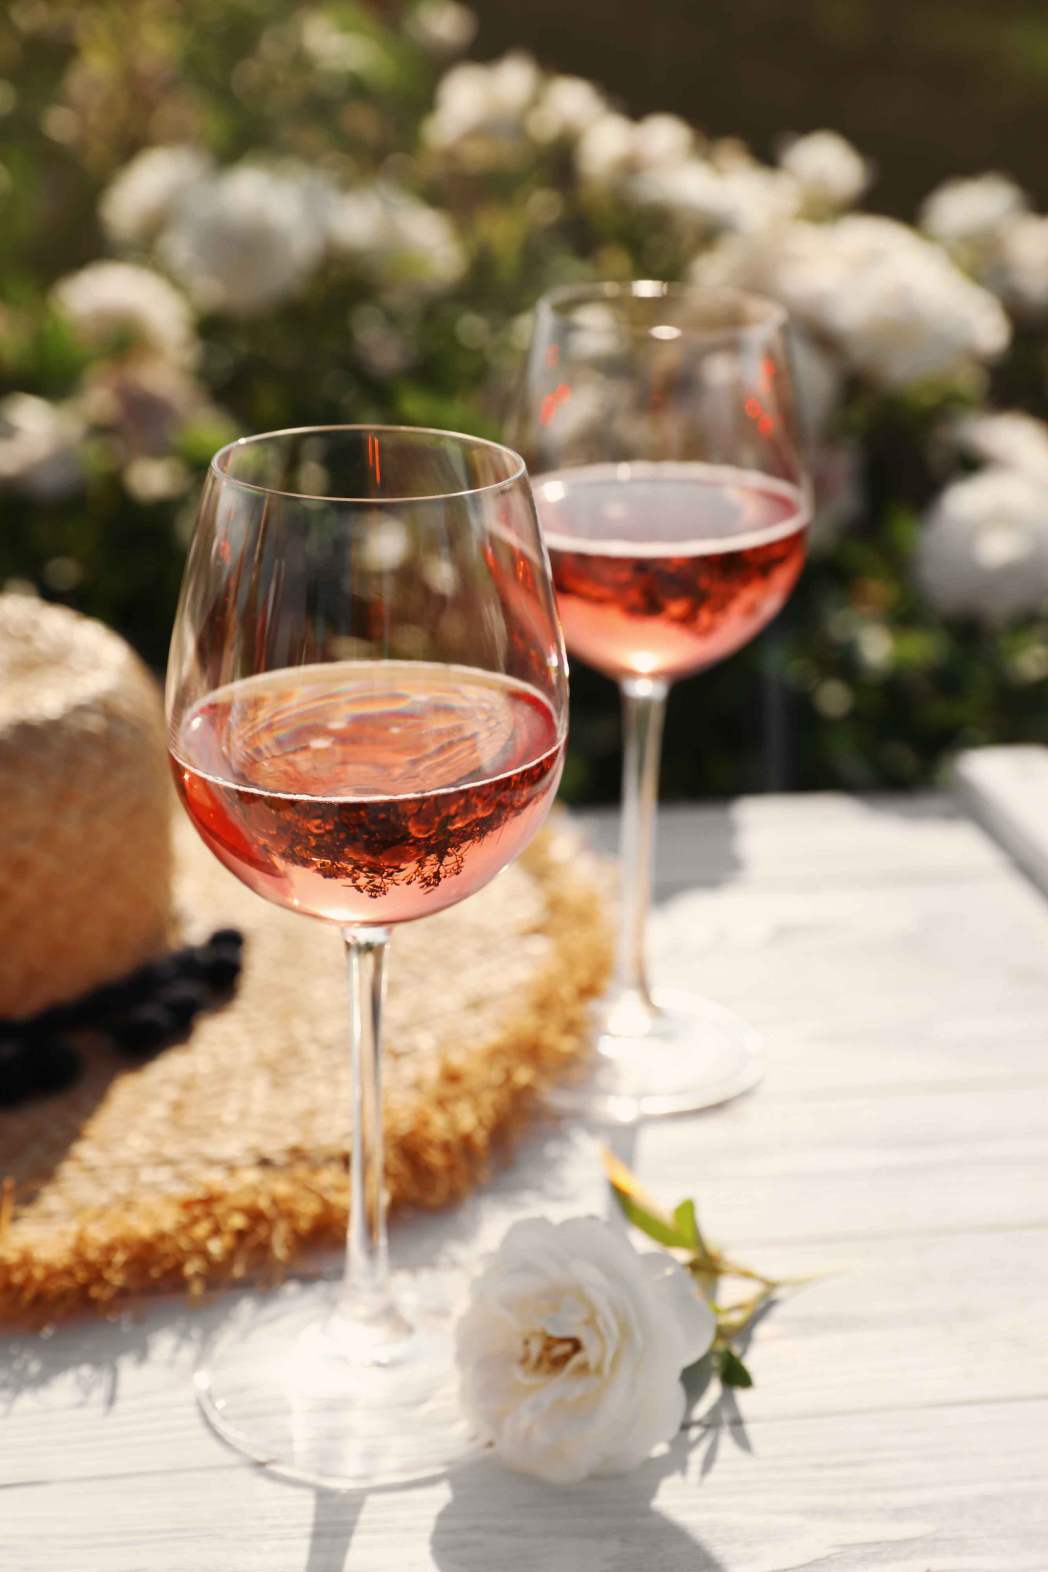 Image for blog - English wines for spring: 6 of the best